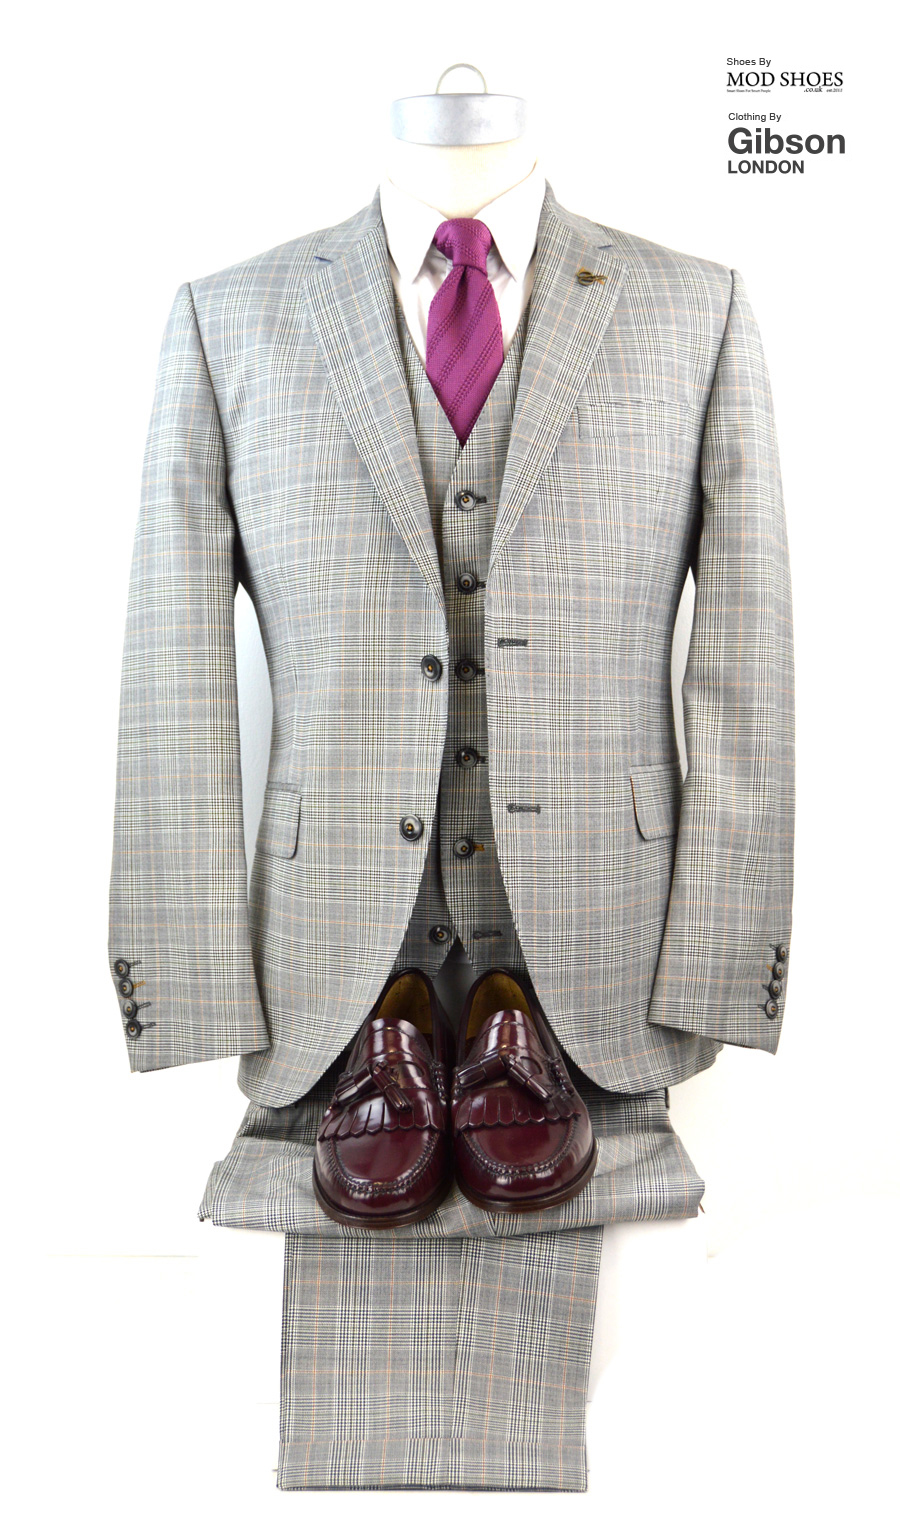 modshoes-oxblood-tassel-loafwers-with-prince-of-wales-suit